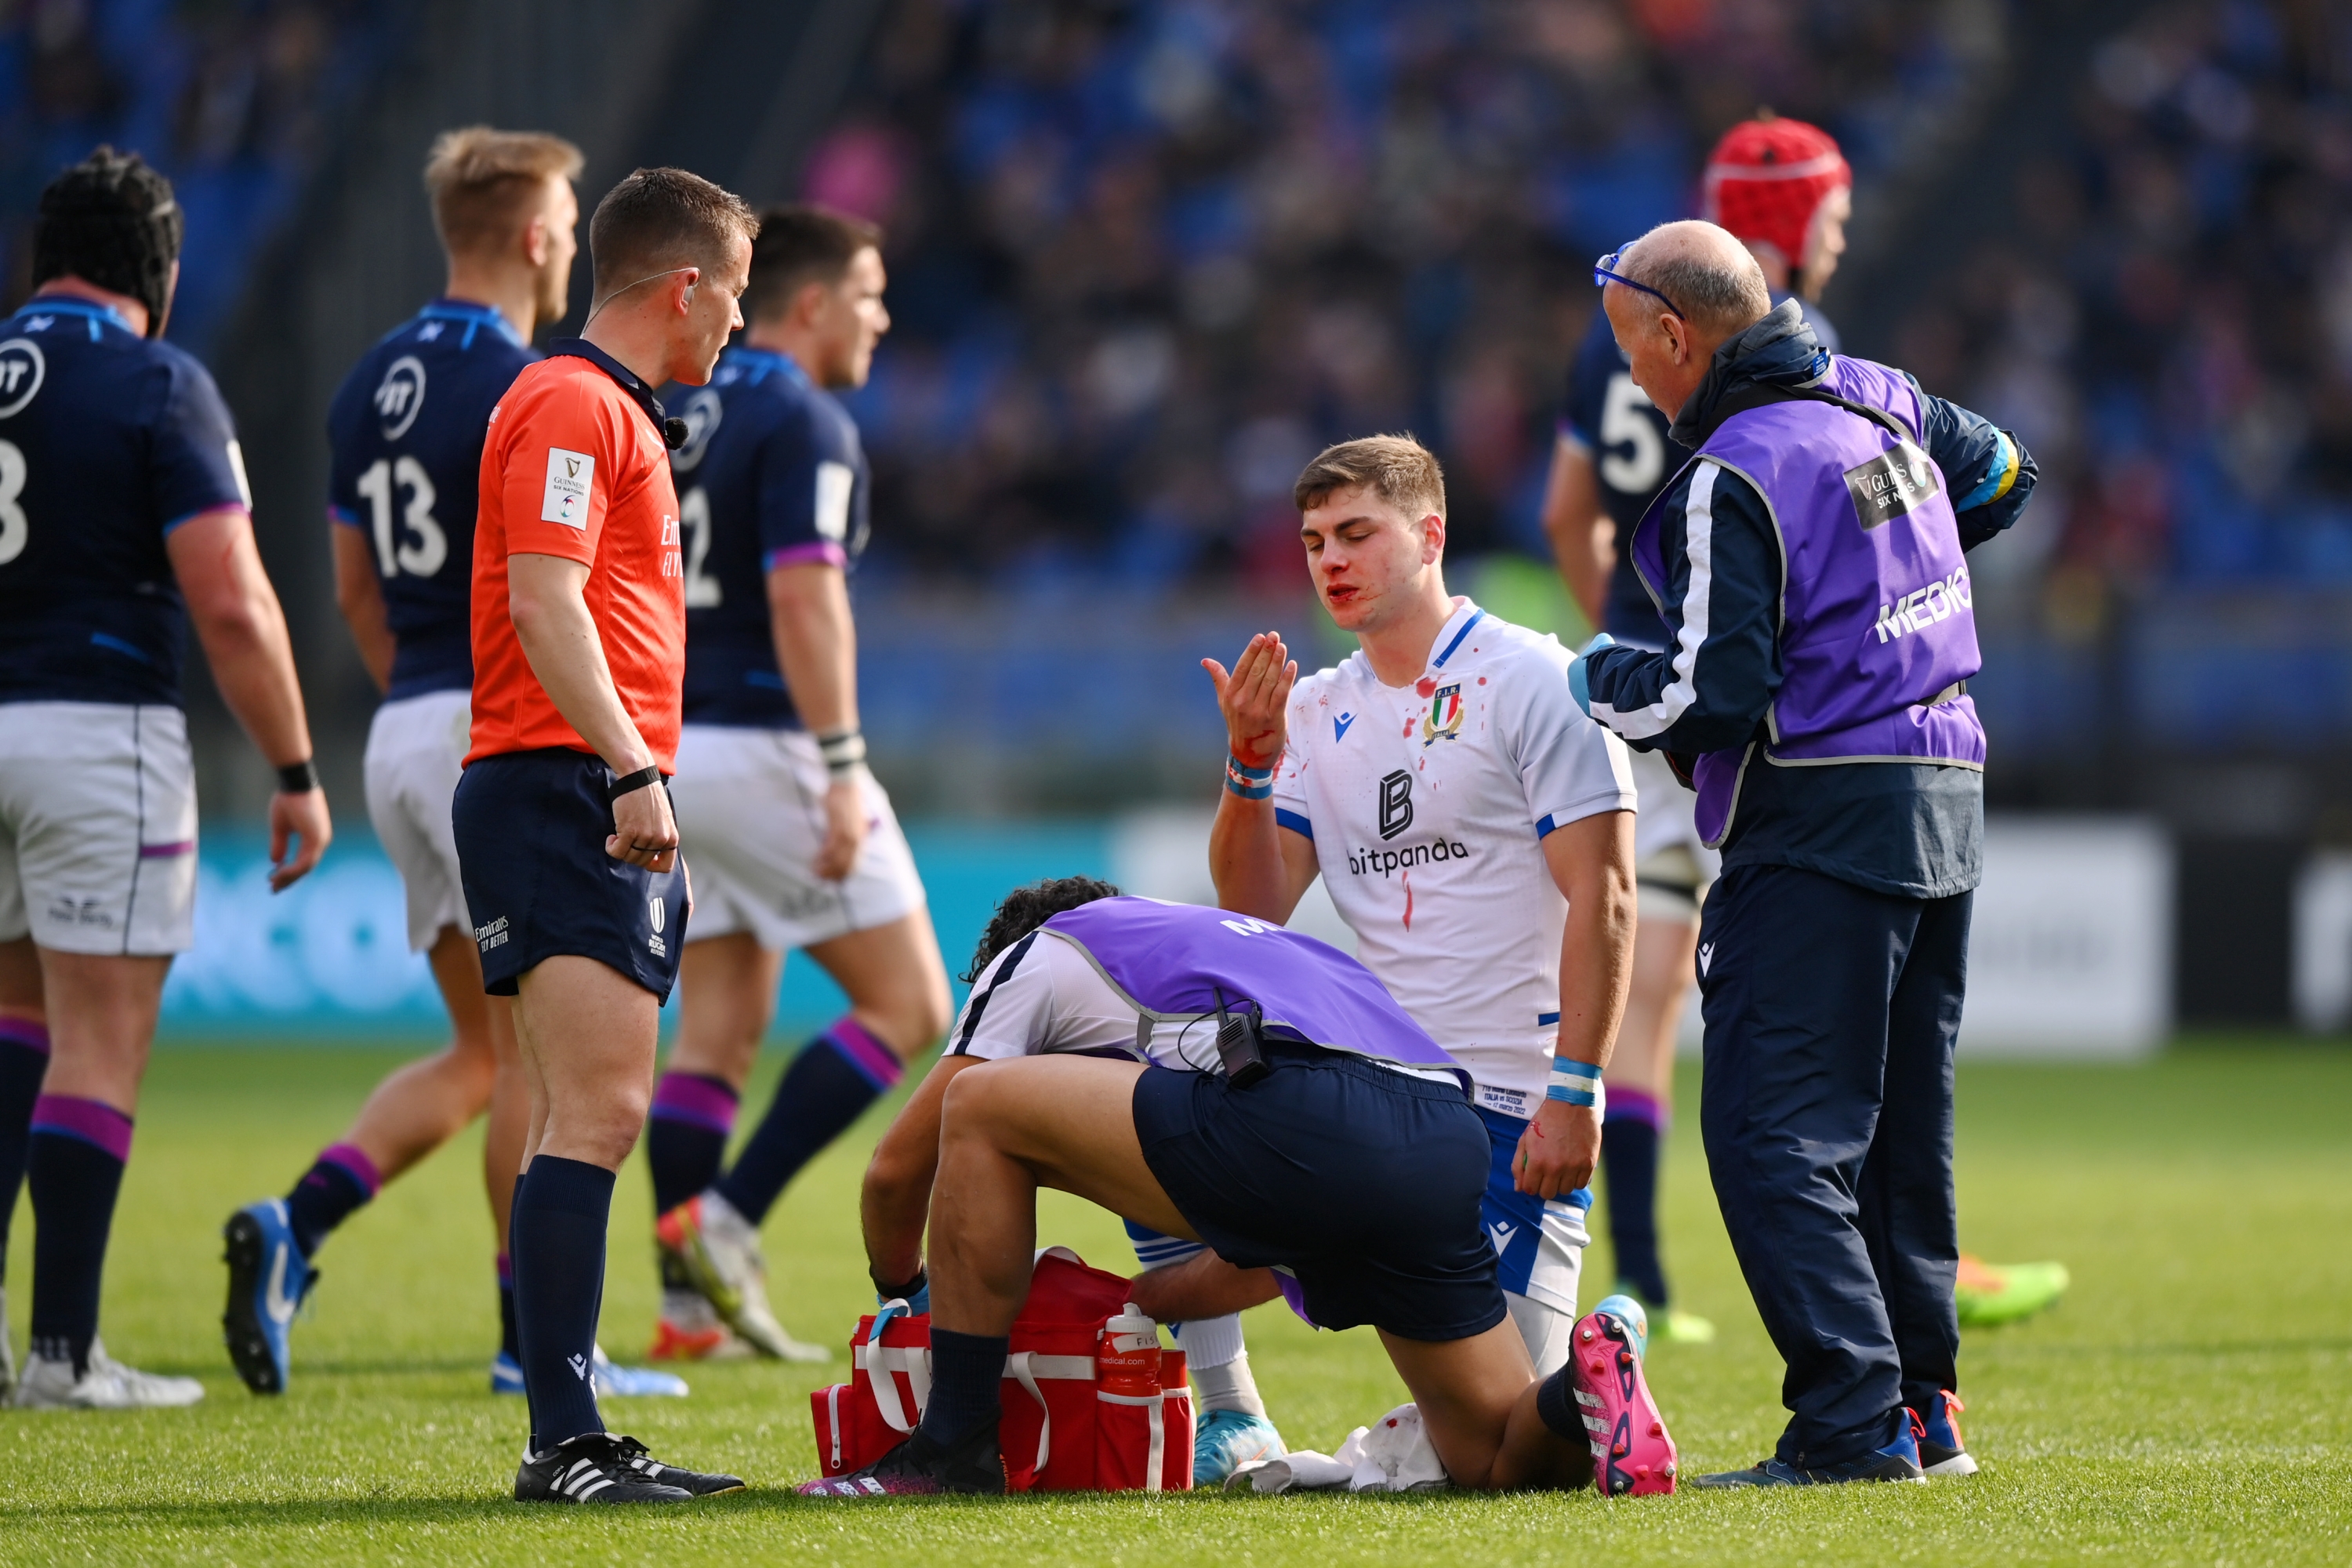 ROME, ITALY - MARCH 12: Leonardo Marin of Italy receives medical treatment during the Guinness Six Nations Rugby match between Italy and Scotland at Stadio Olimpico on March 12, 2022 in Rome, Italy. (Photo by Justin Setterfield/Getty Images)